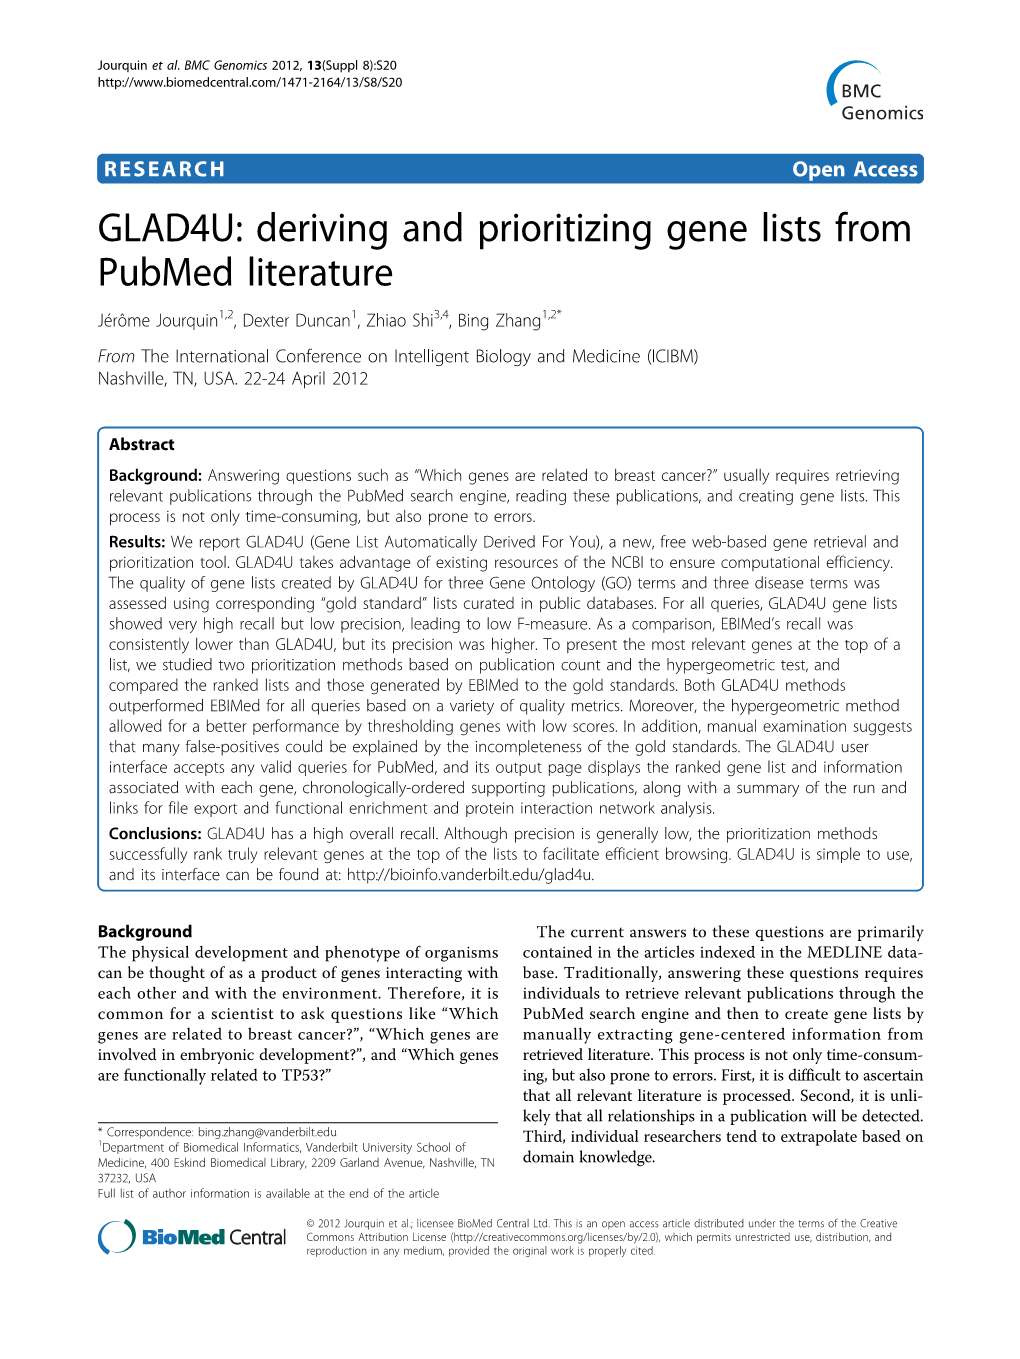 Deriving and Prioritizing Gene Lists from Pubmed